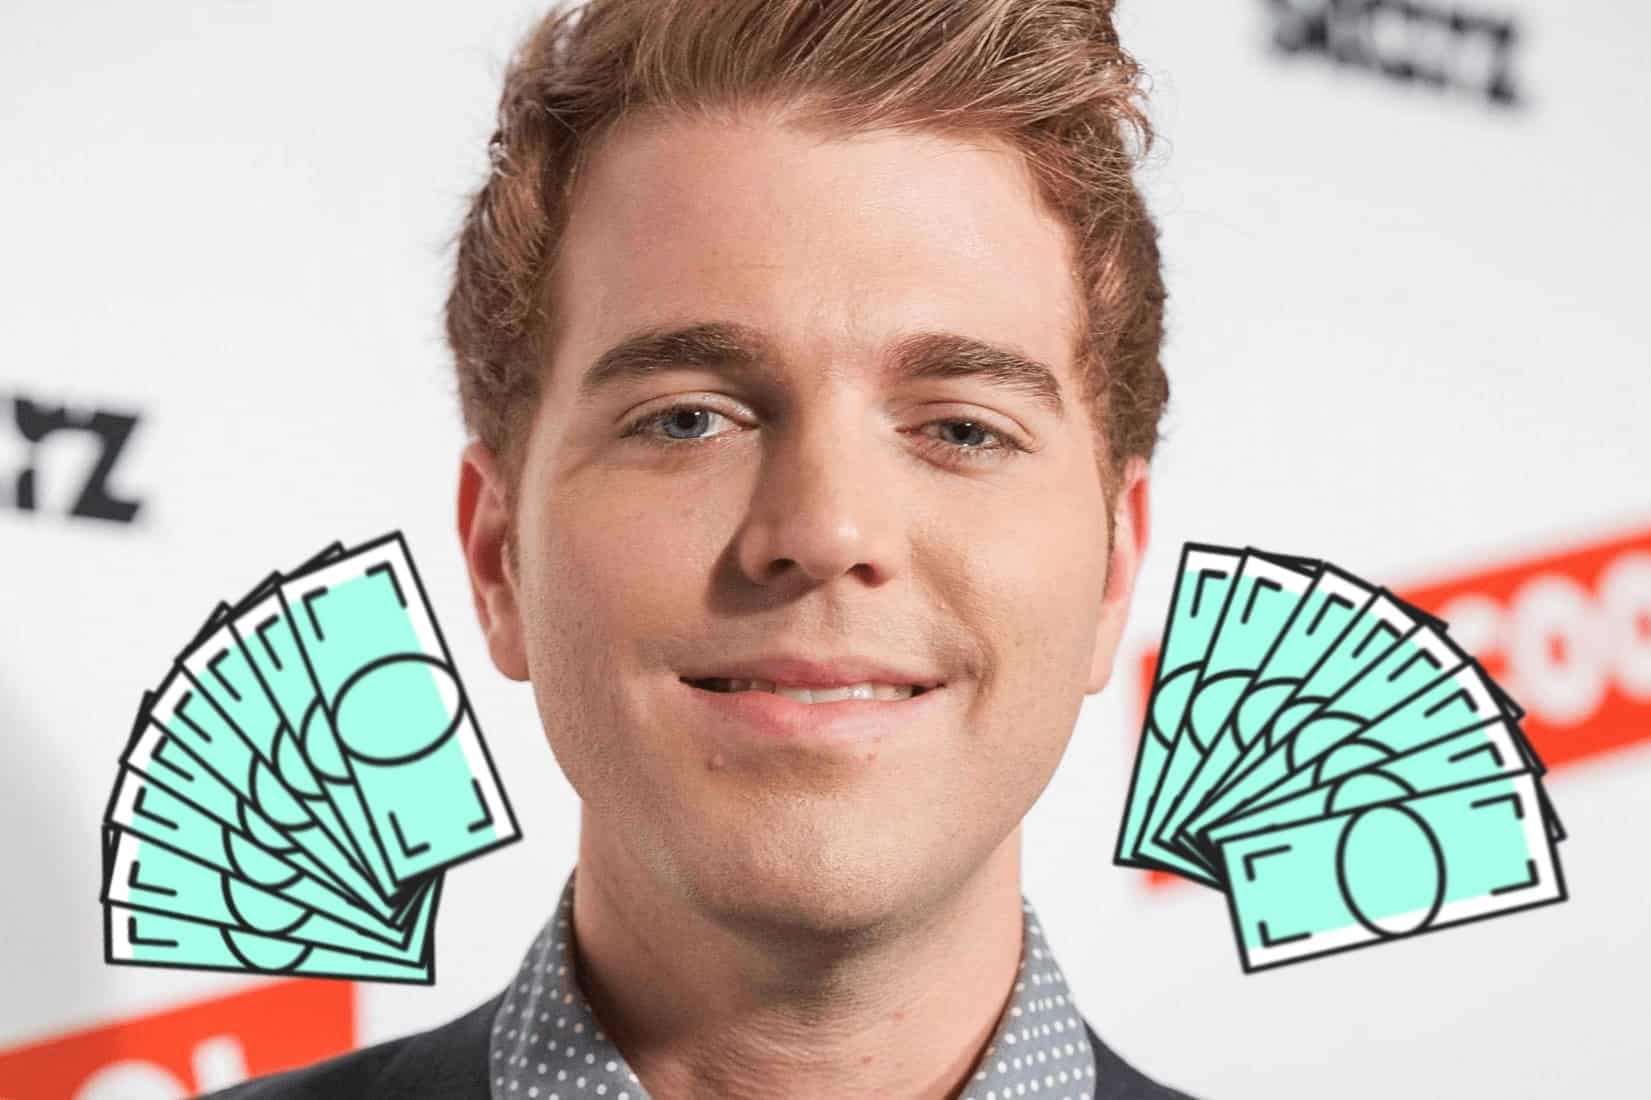 Shane Dawson Net Worth How He Turned a Passion into Profit